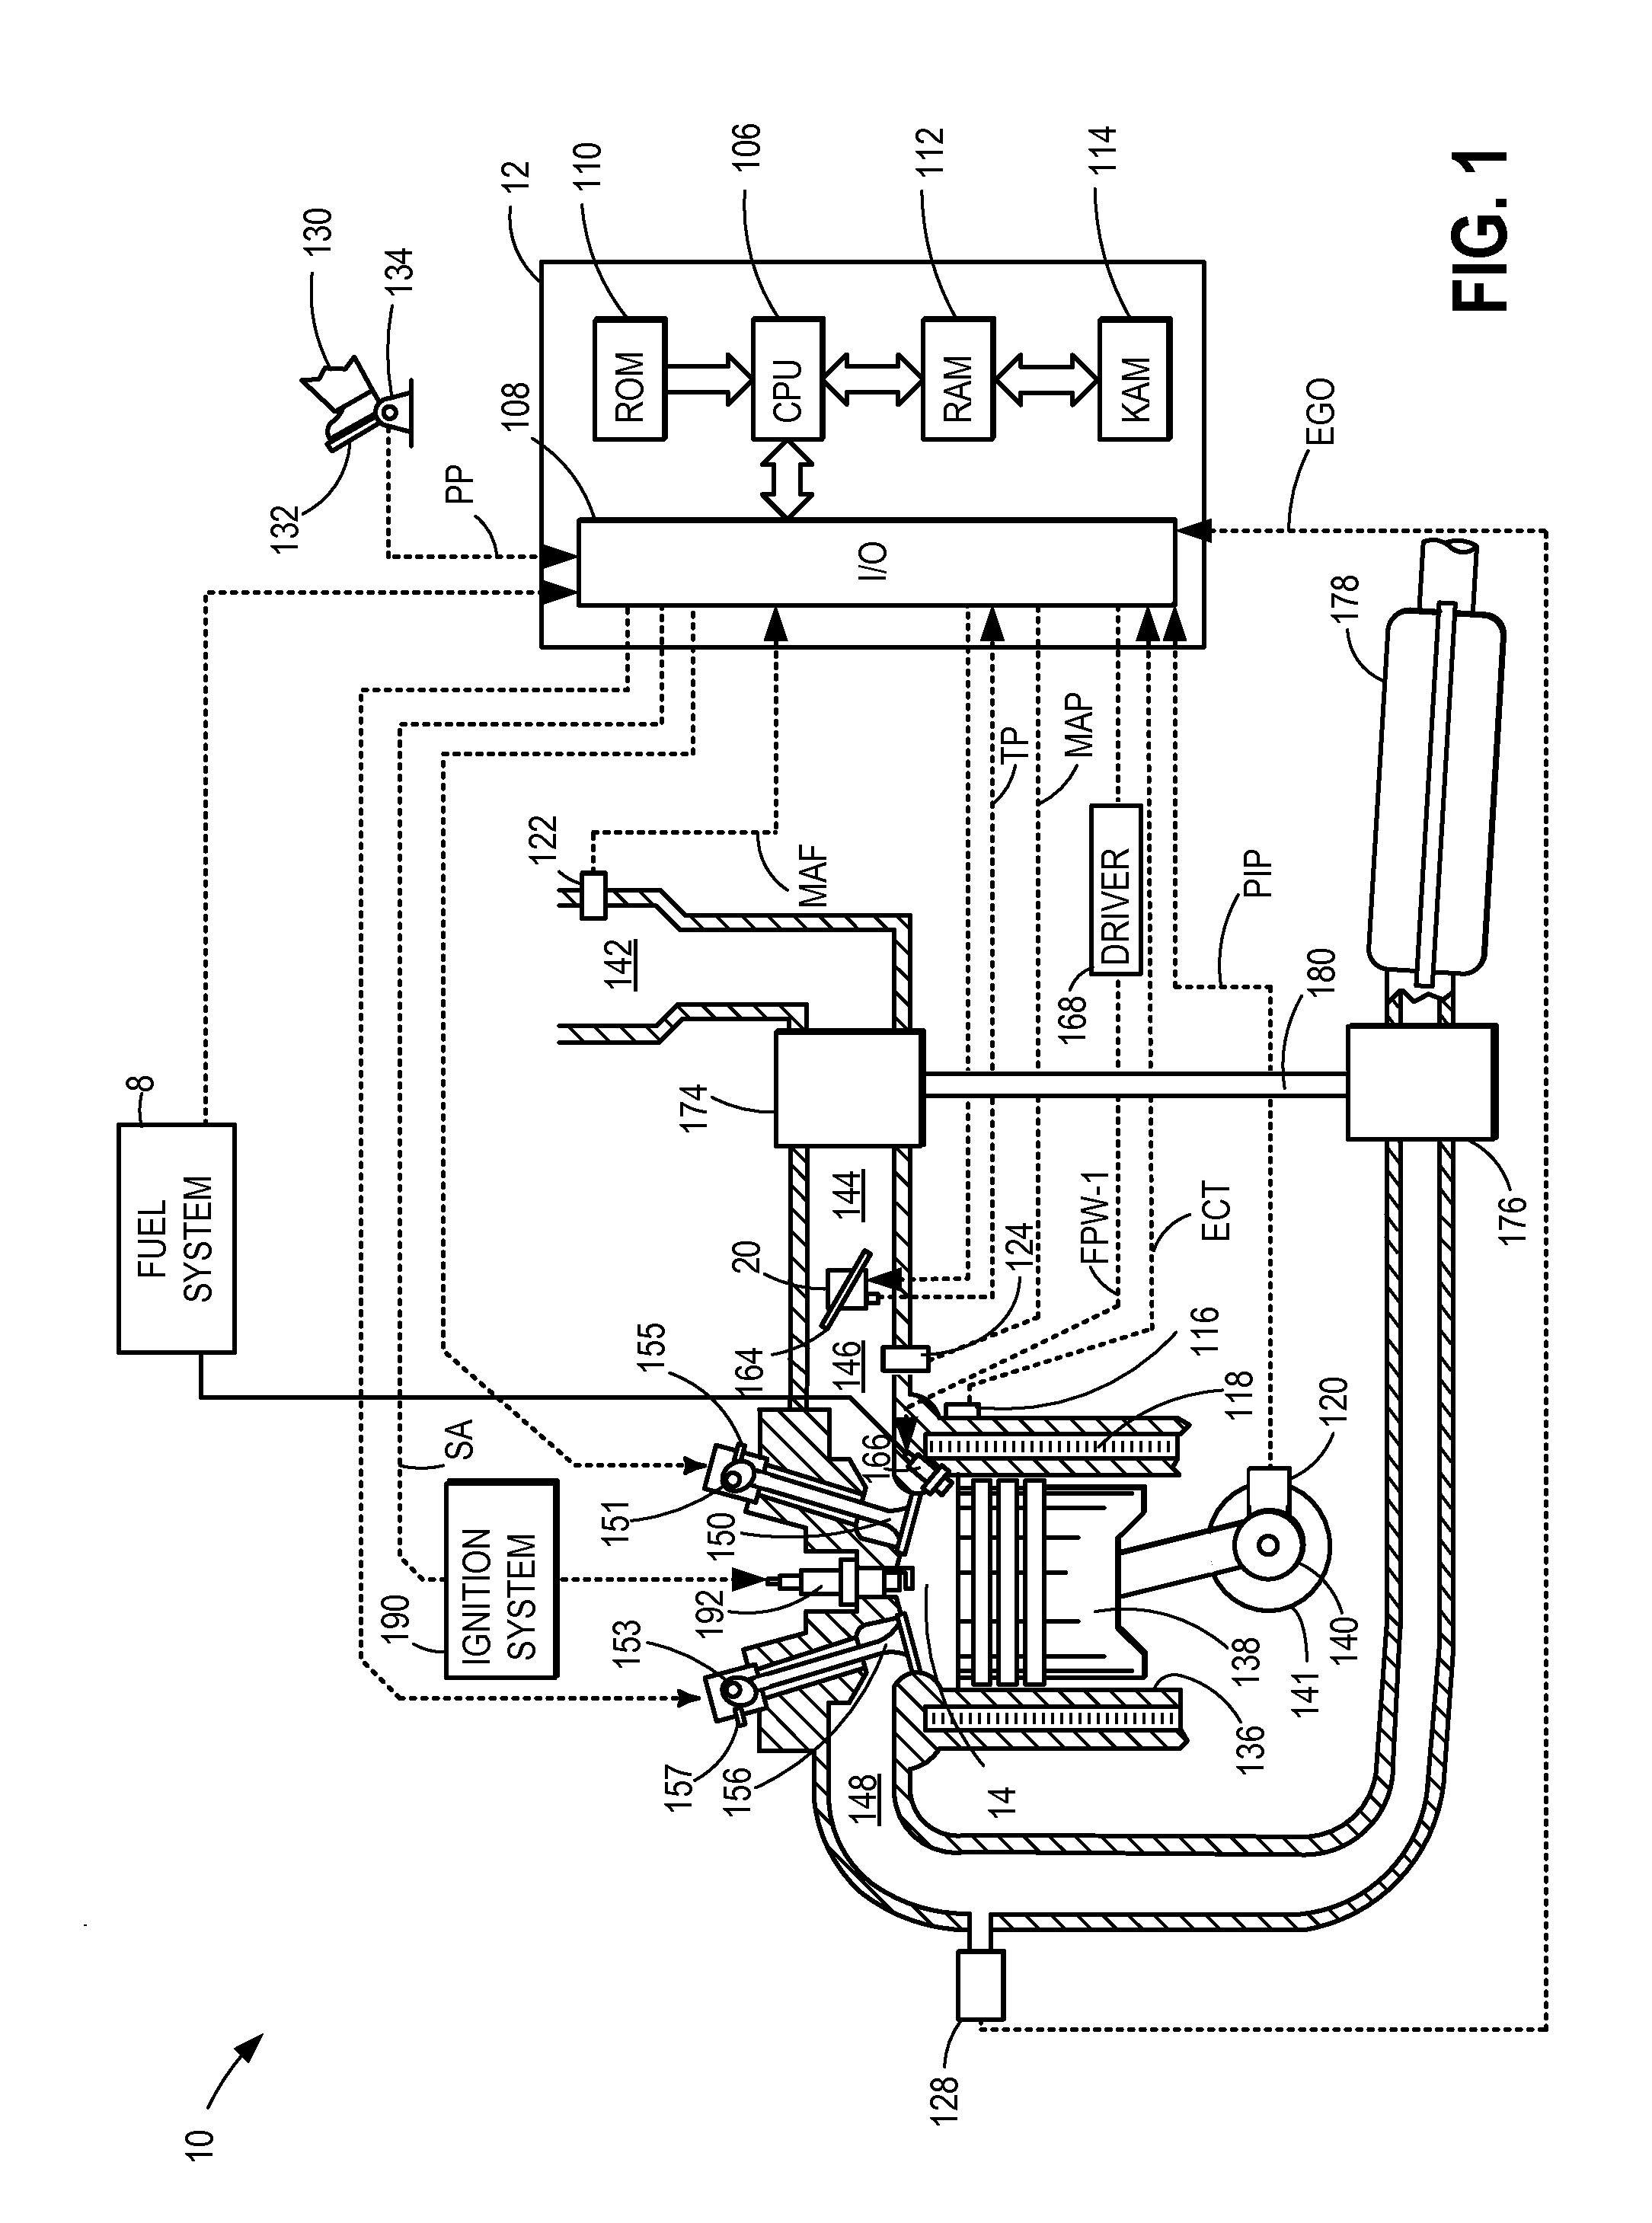 Method for initiating and maintaining a substoichiometric operating mode of an internal combustion engine and internal combustion engine for carrying out a method of this kind